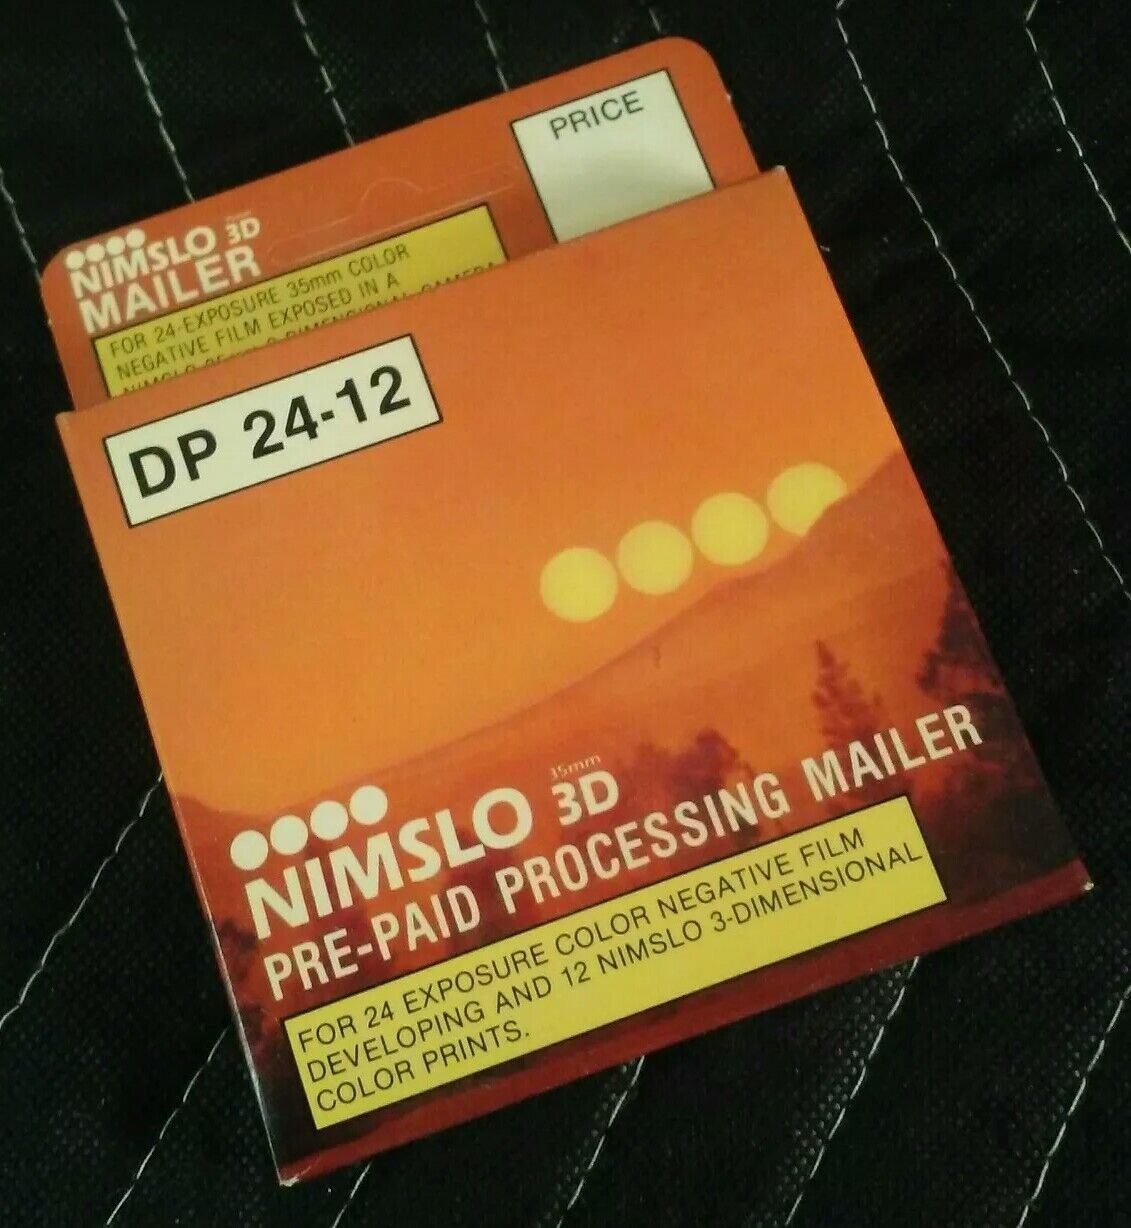 Nimslo 3D Pre-Paid Processing Mailer